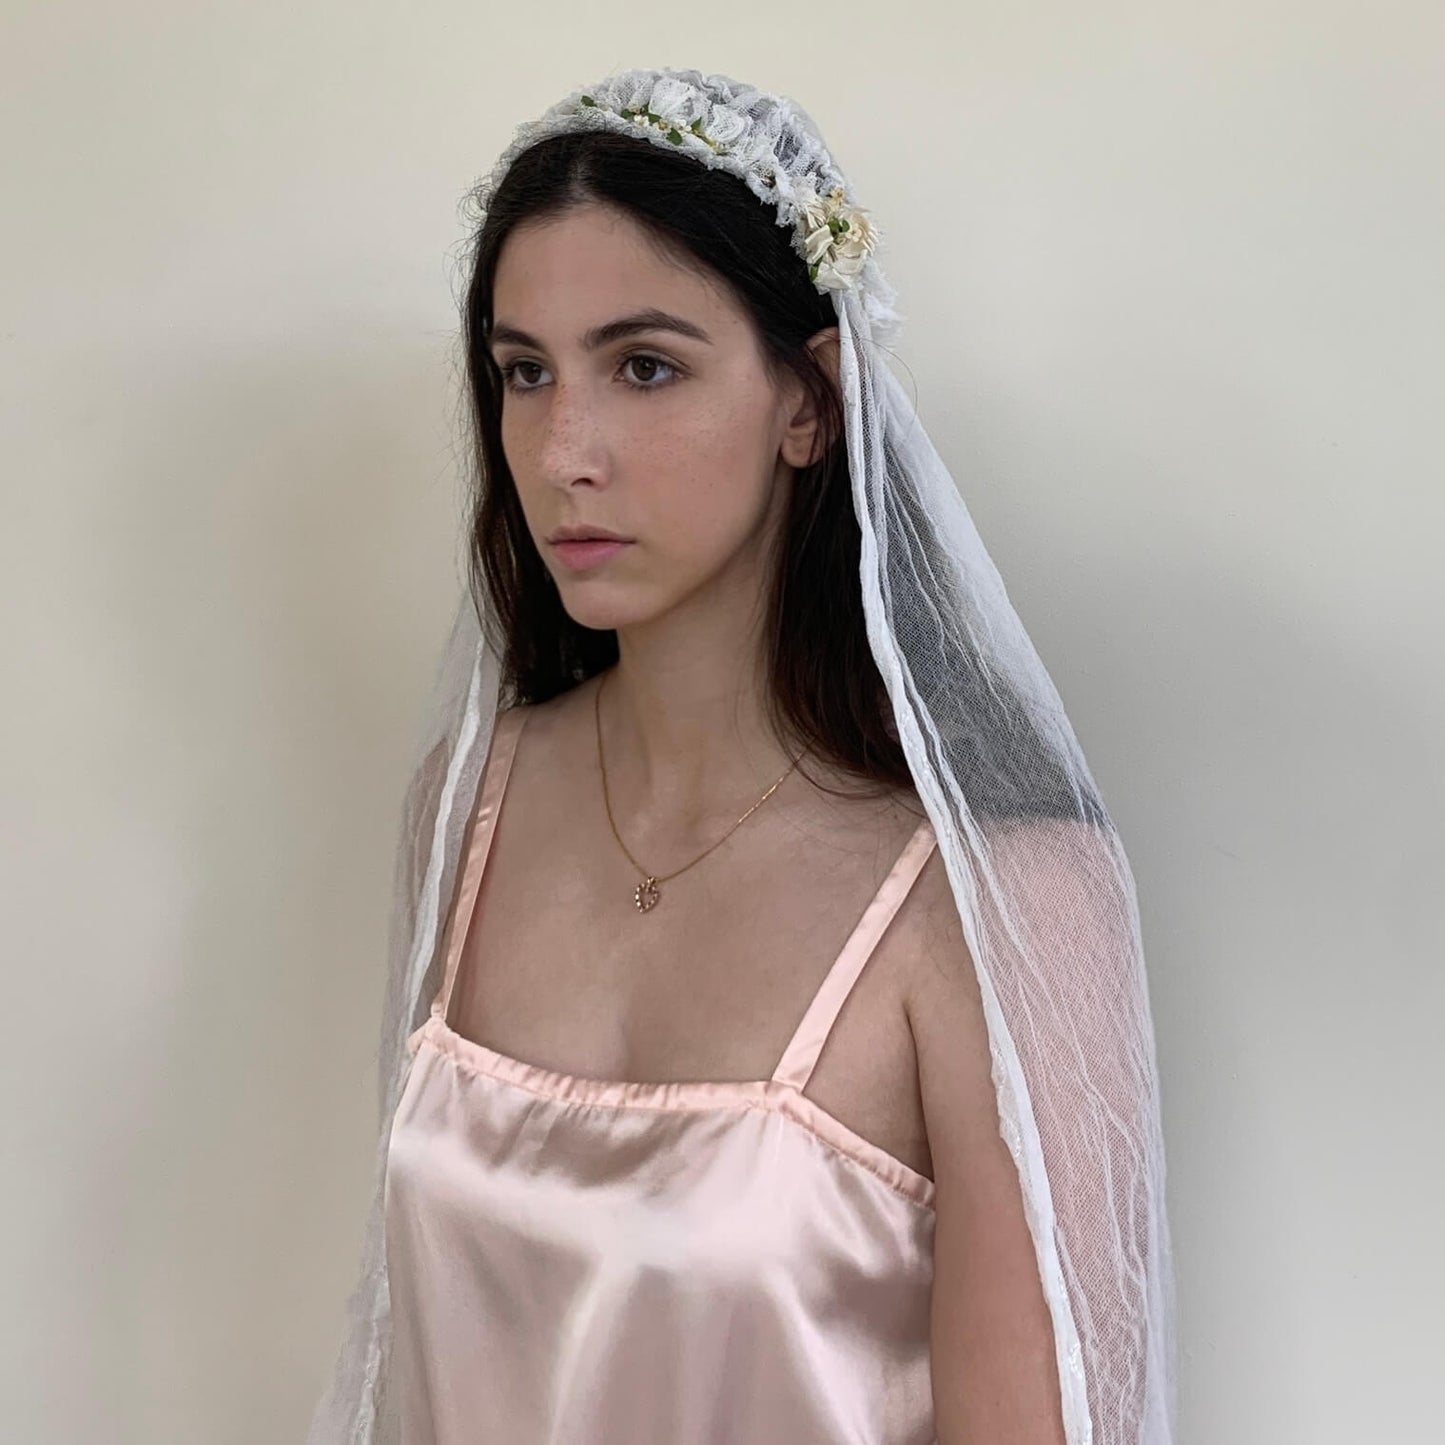 additional view of model wearing 1920s wedding veil